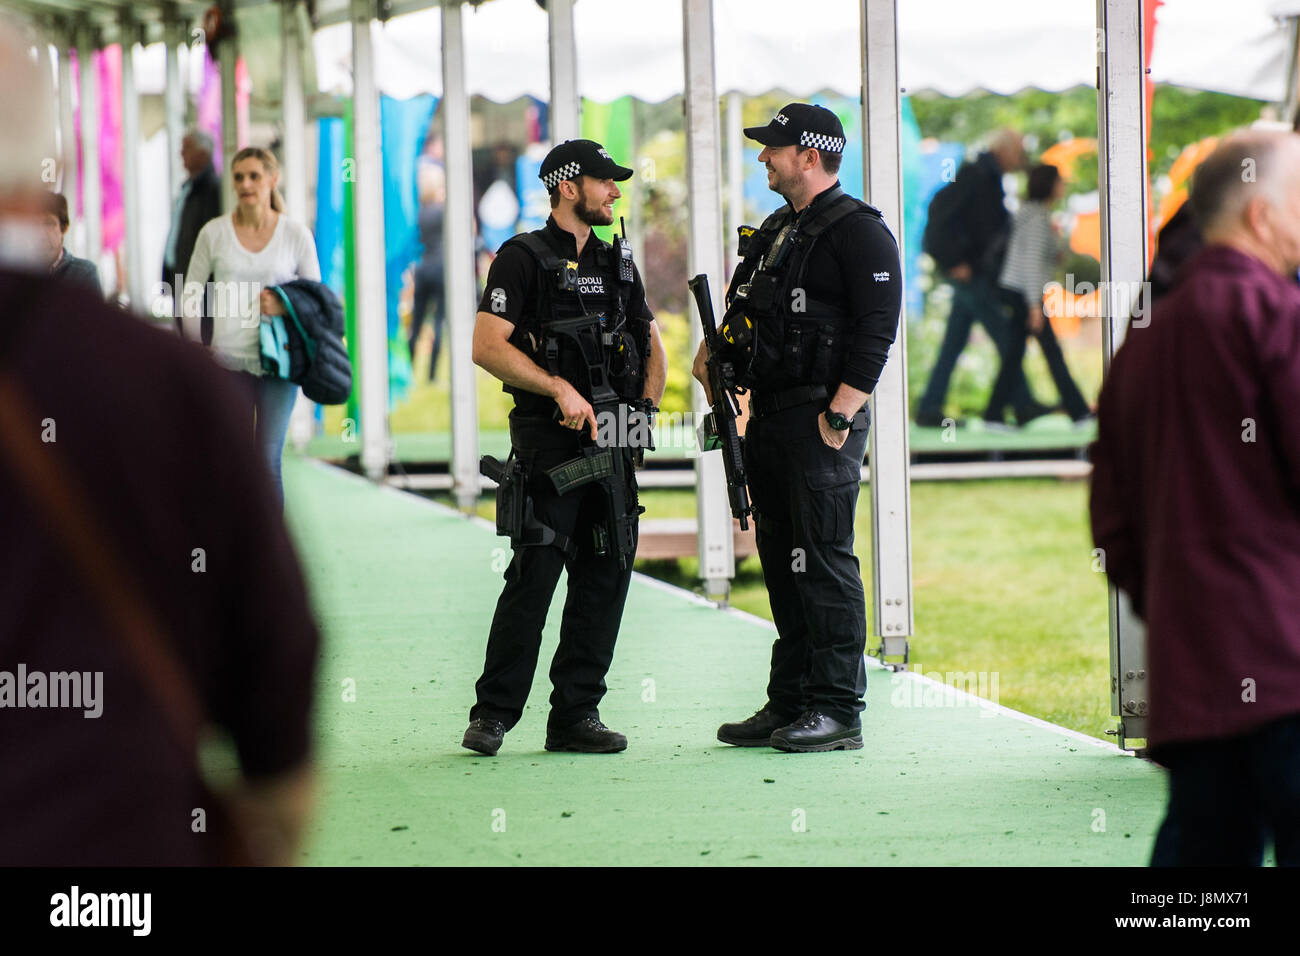 Hay Festival, Wales UK, Monday 29 May 2017 Armed police officers patrolling the site of the 2017 Hay Festival on Bank Holiday Monday Now in its 30th year, the festival draws tens of thousand of visitors a day to what was described by former US president Bill Clinton as 'the woodstock of the mind' Photo credit Credit: keith morris/Alamy Live News Stock Photo